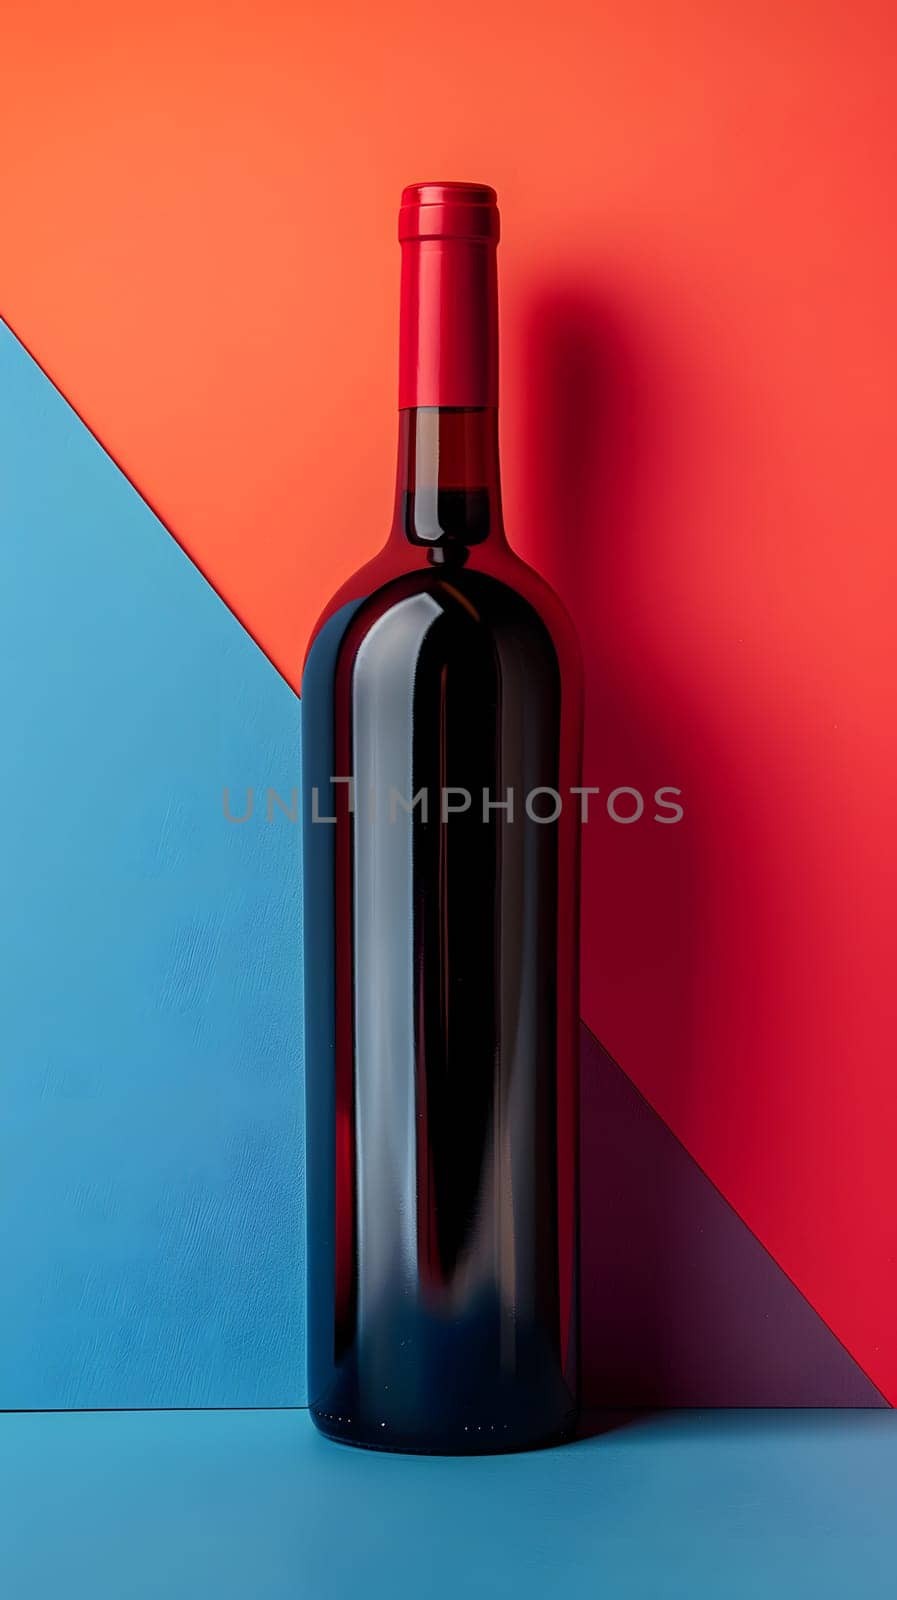 A glass bottle containing red wine sits on a blue and red background by Nadtochiy